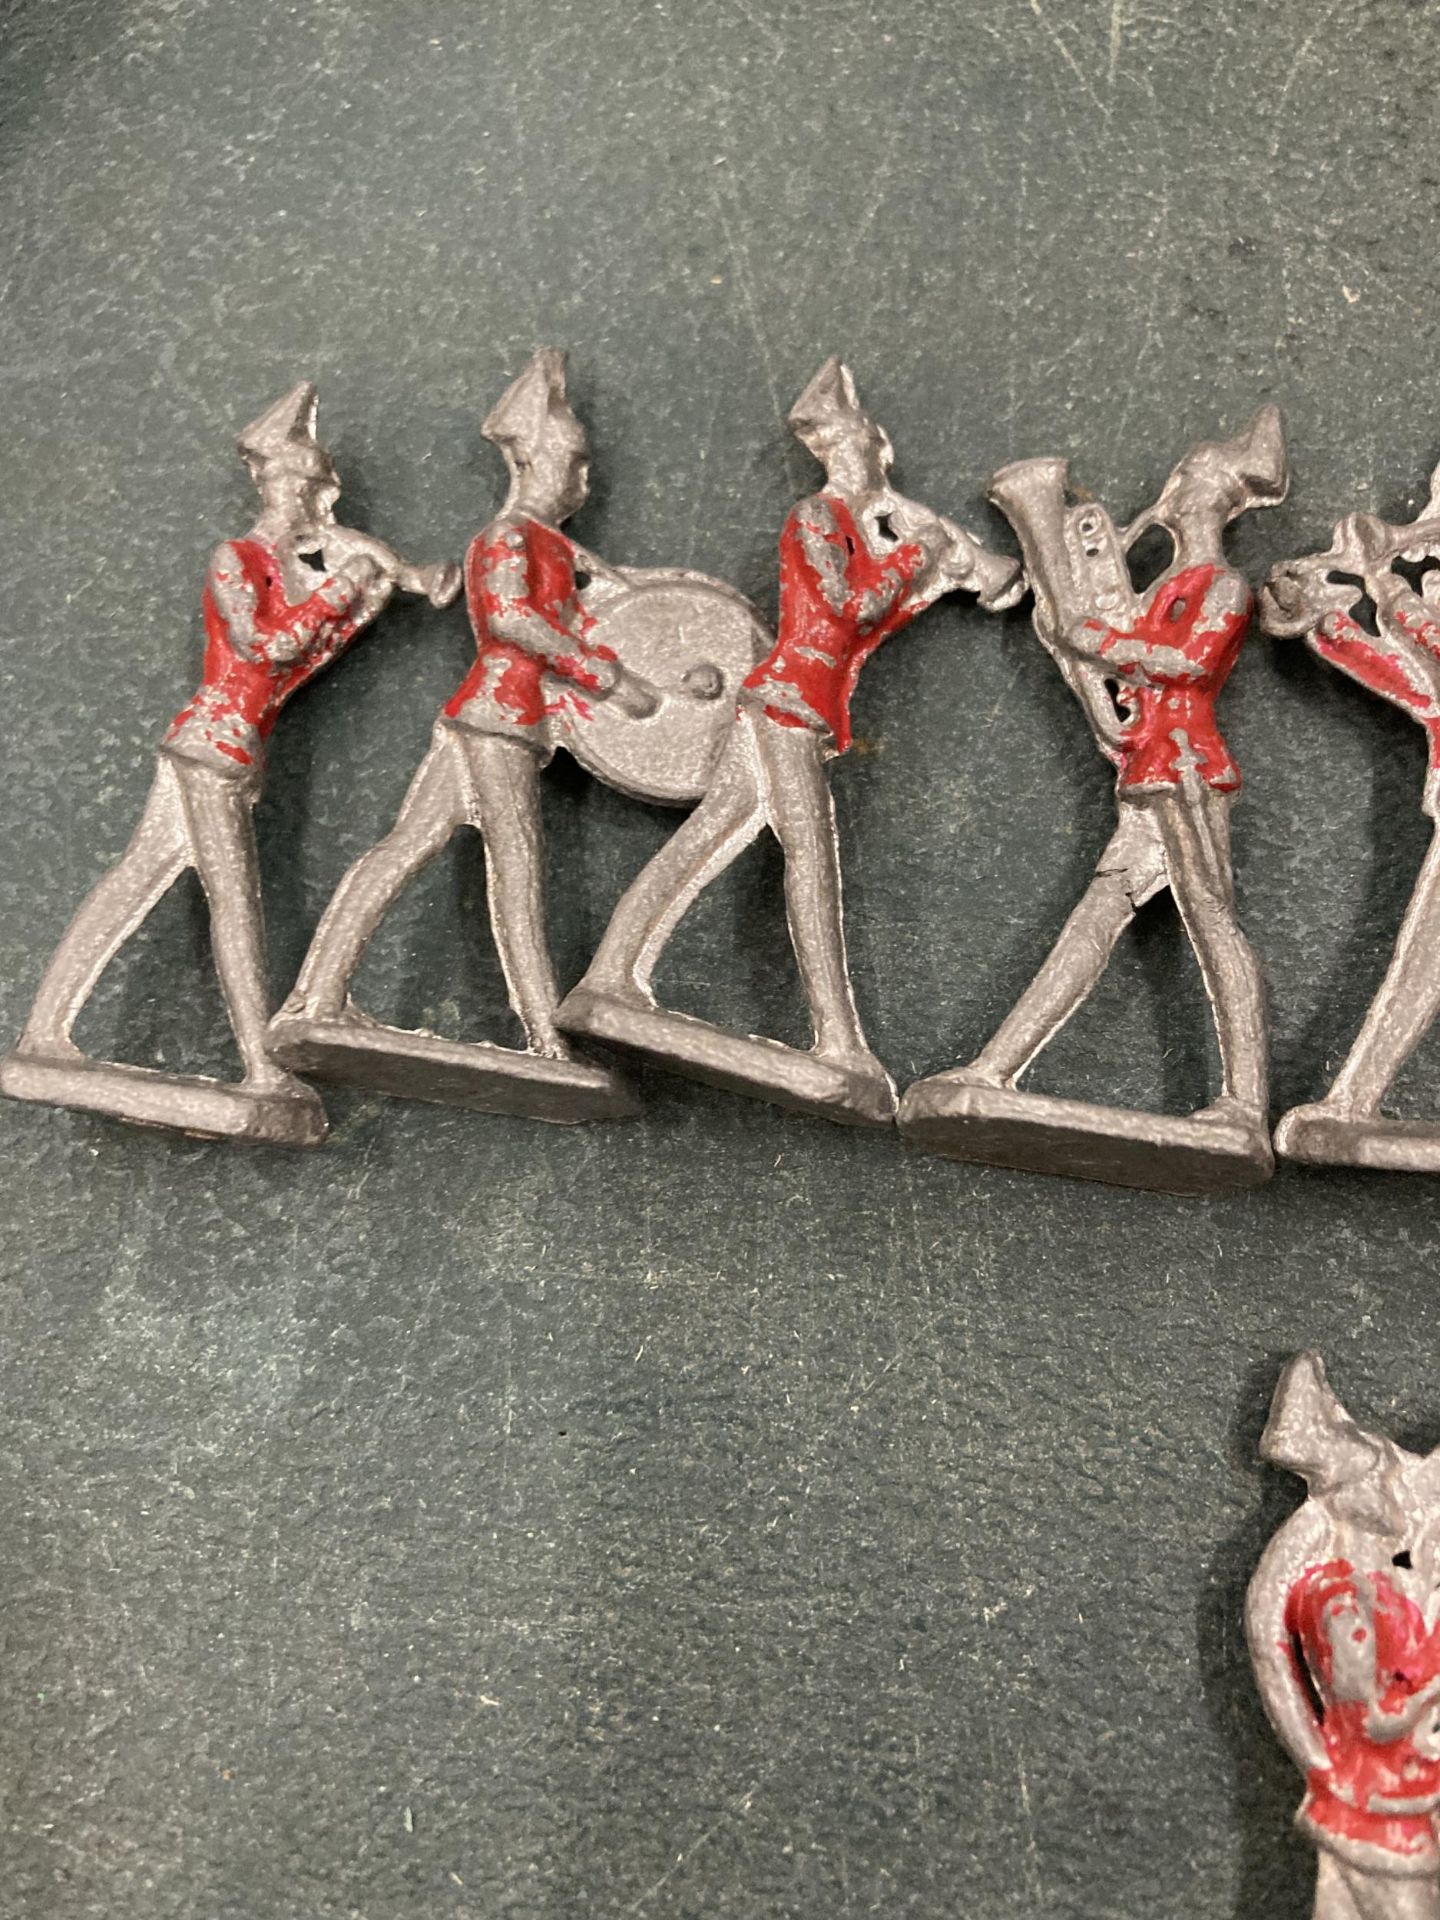 A VINTAGE 12 PIECE LEAD REDCOAT BRASS BAND - Image 2 of 5